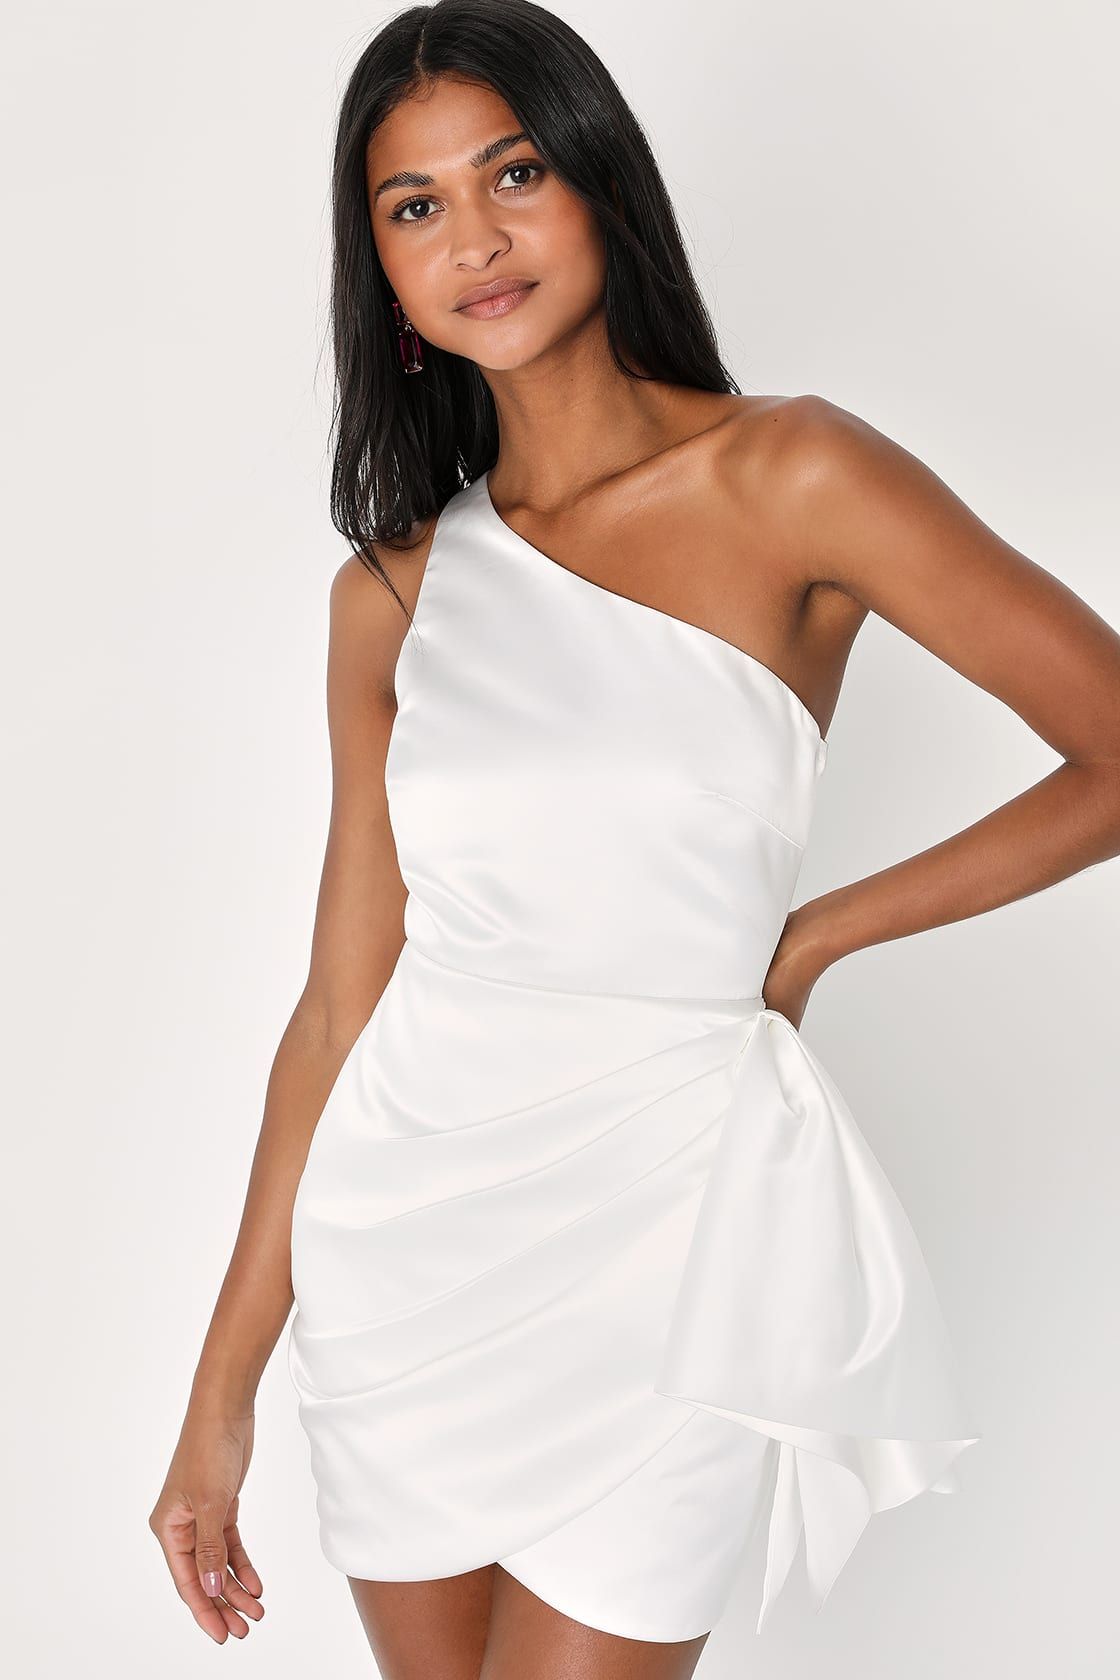 All About Her White Satin One-Shoulder Bow Mini Dress | Lulus (US)